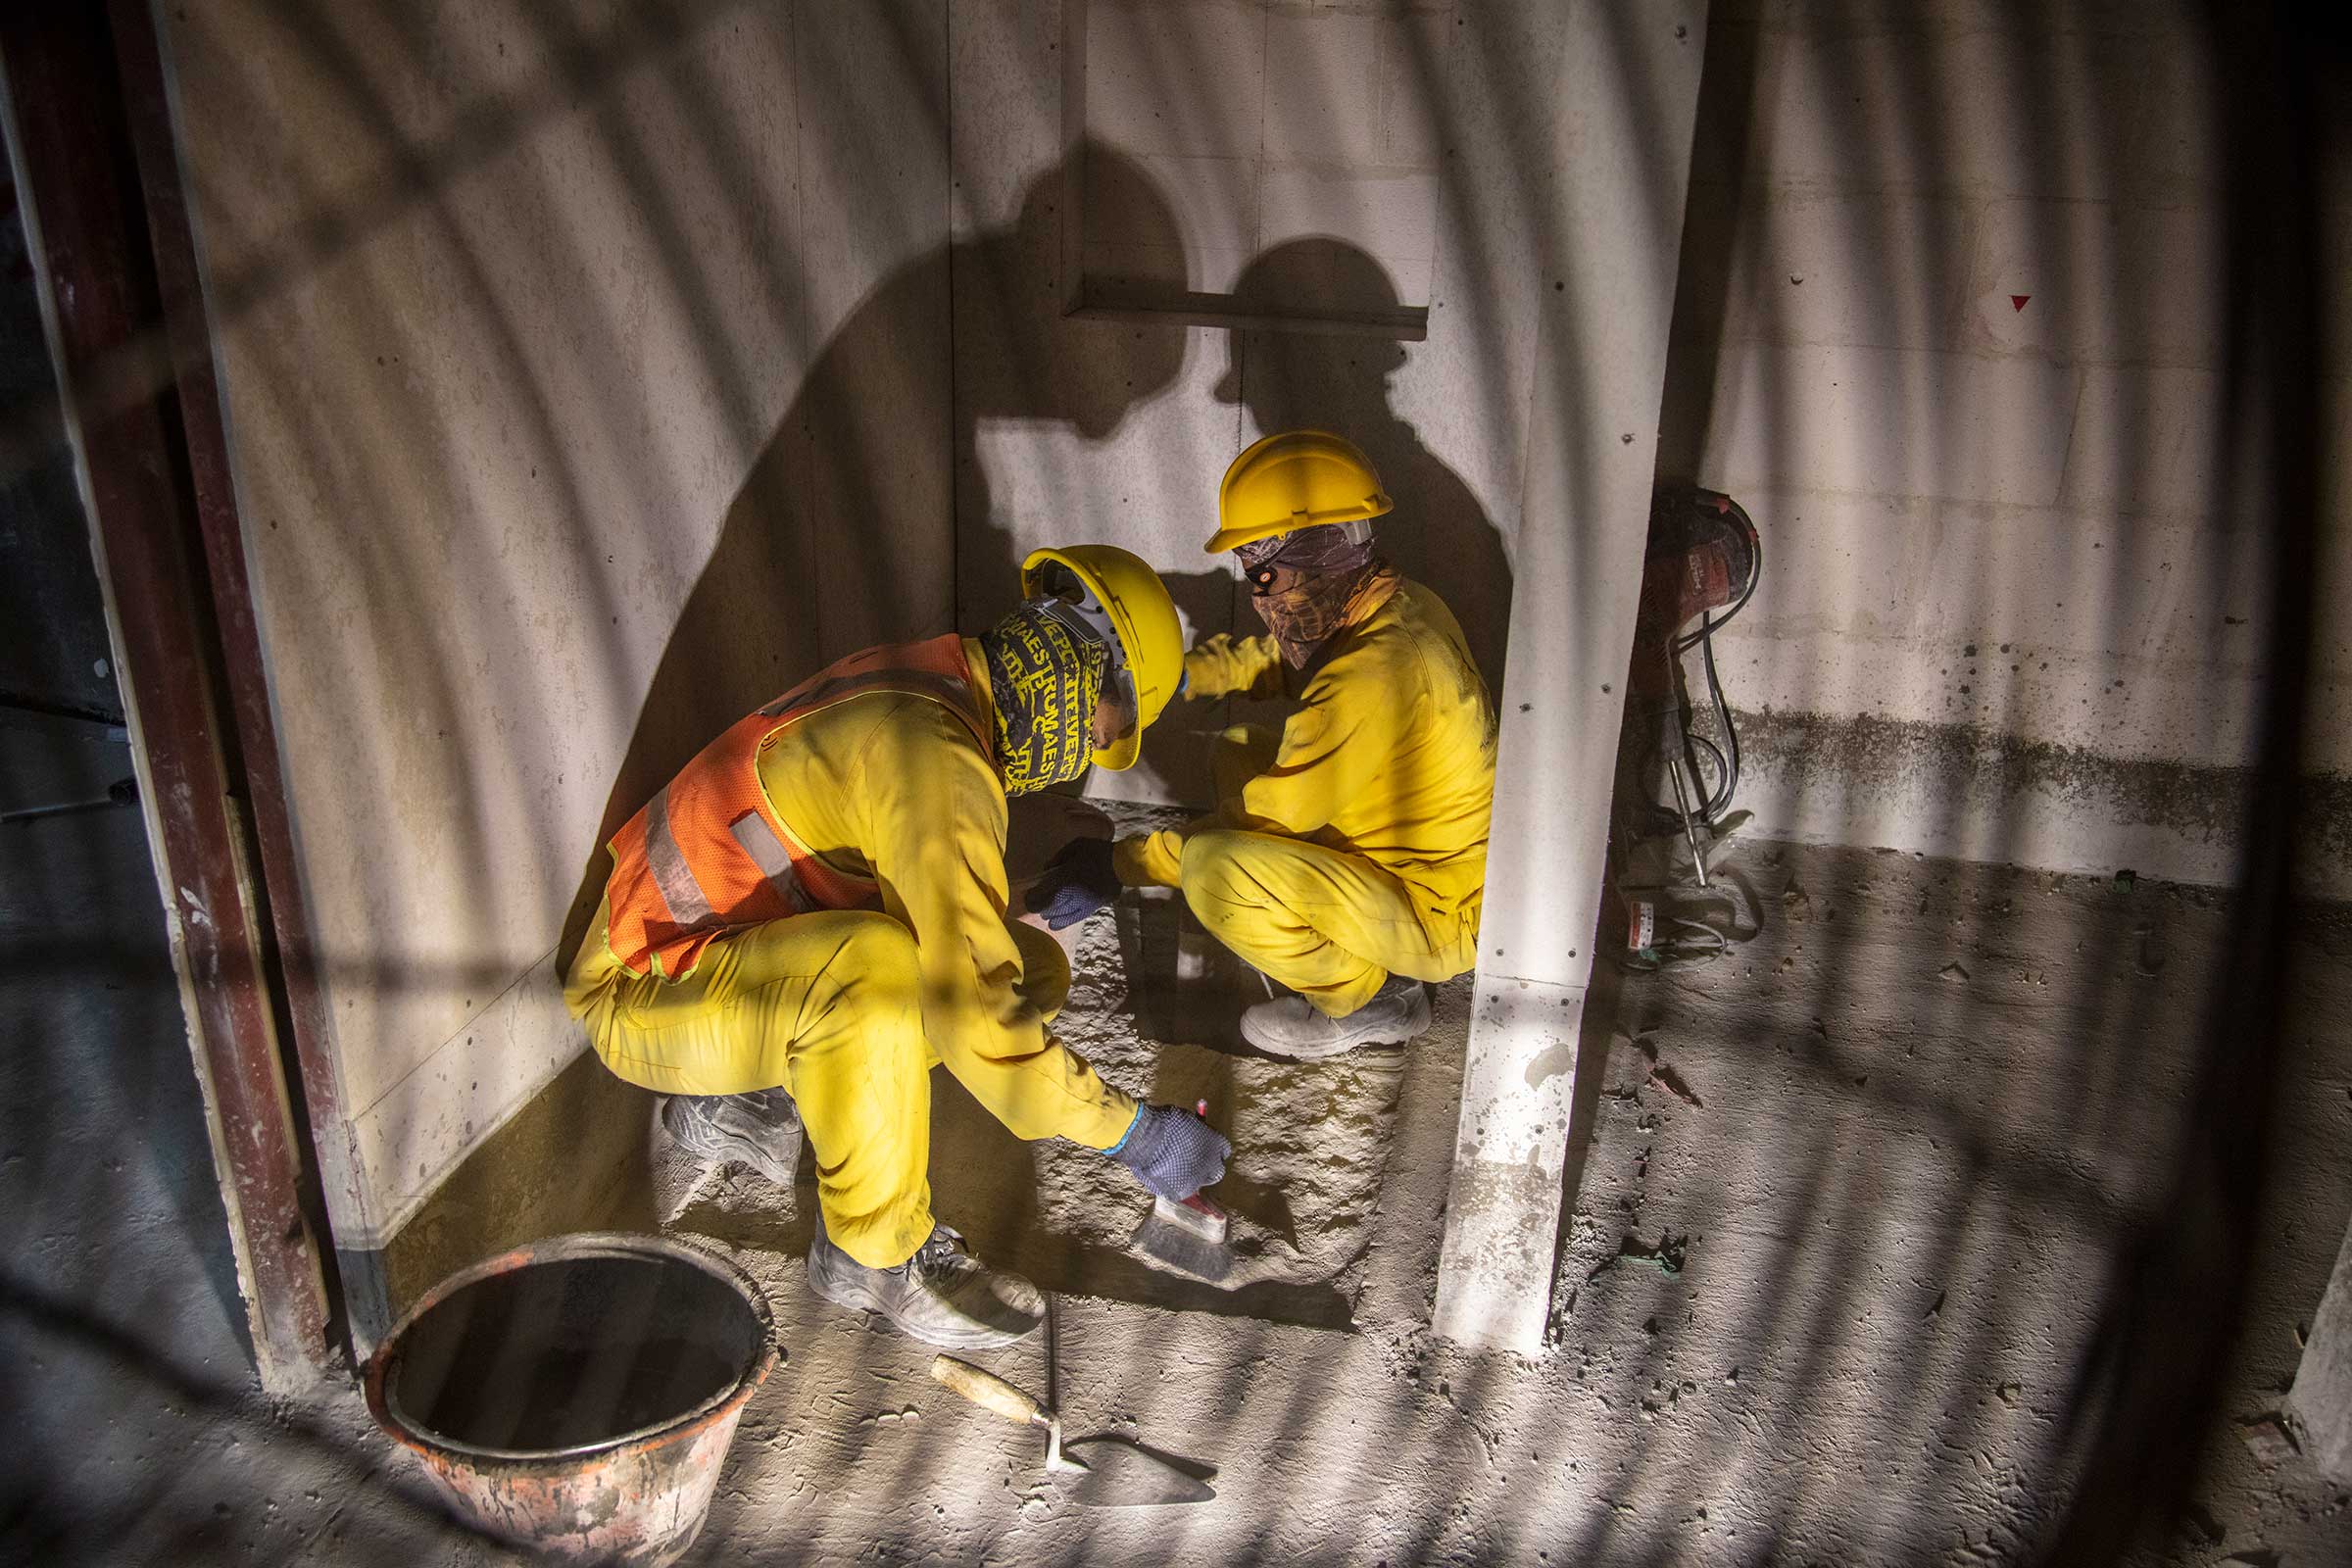 Construction workers in Lusail City switch to cool indoor work when the temperature rises. (Ed Kashi—VII for TIME)